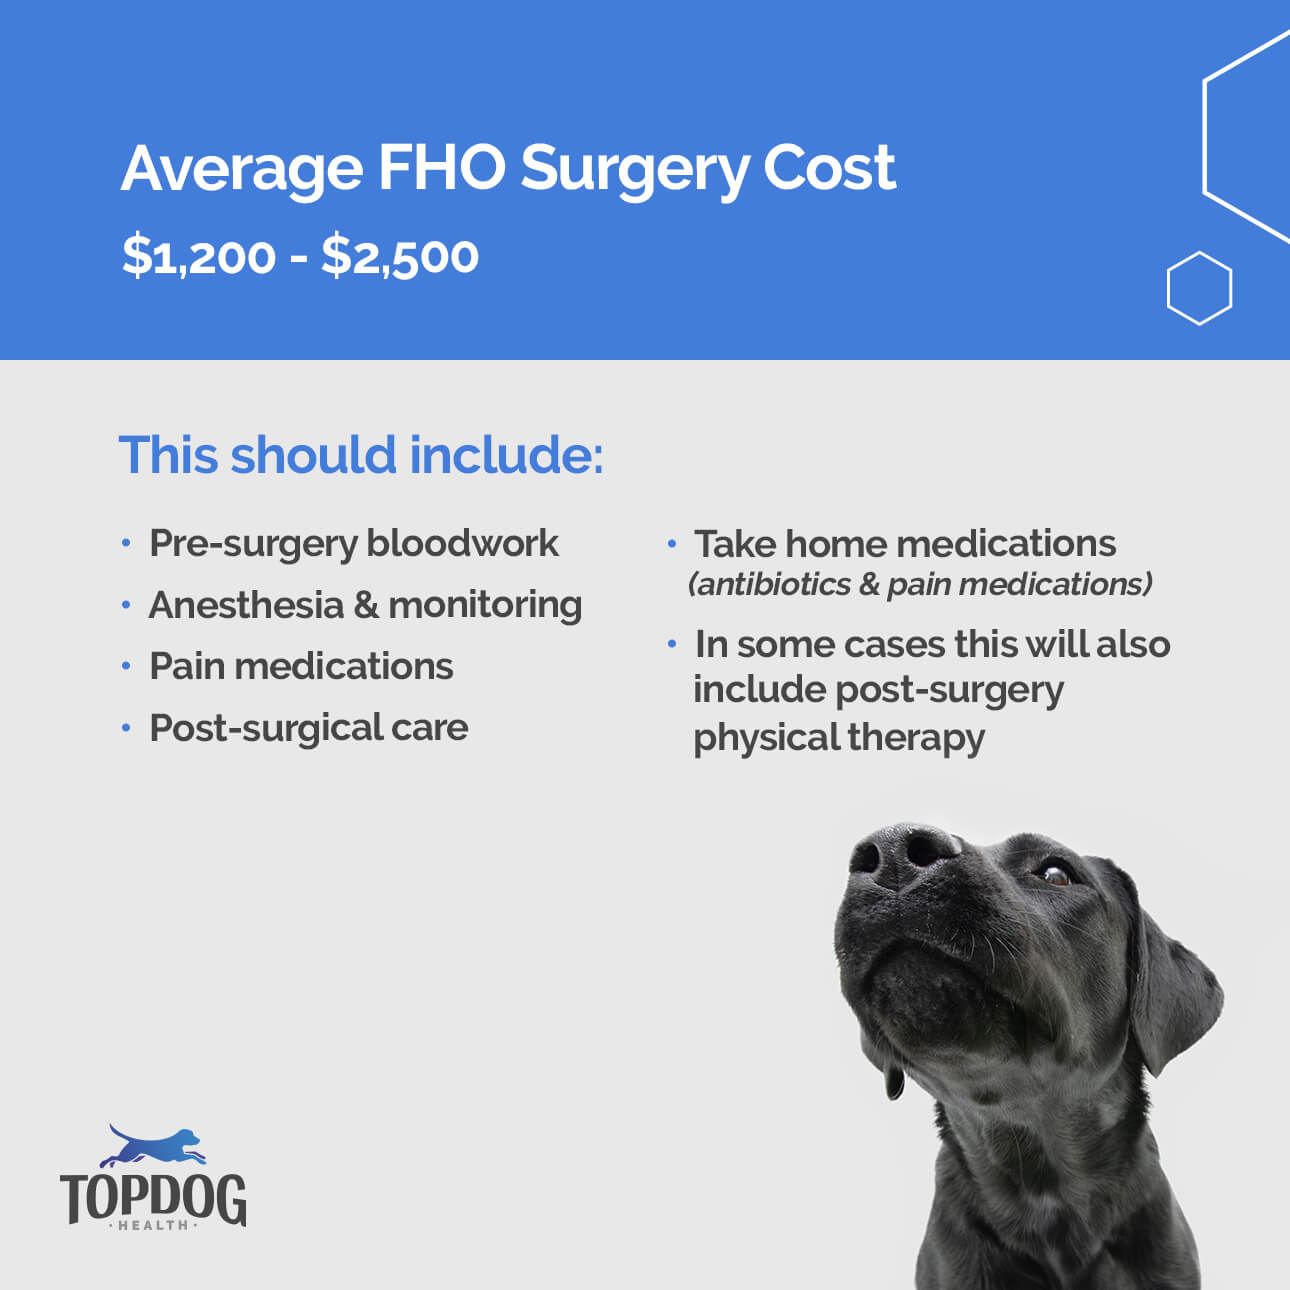 FHO Average Surgery Cost is $1,200-$2,500 - includes pre-surgical bloodwork, anesthesia, antibiotics & pain medications,